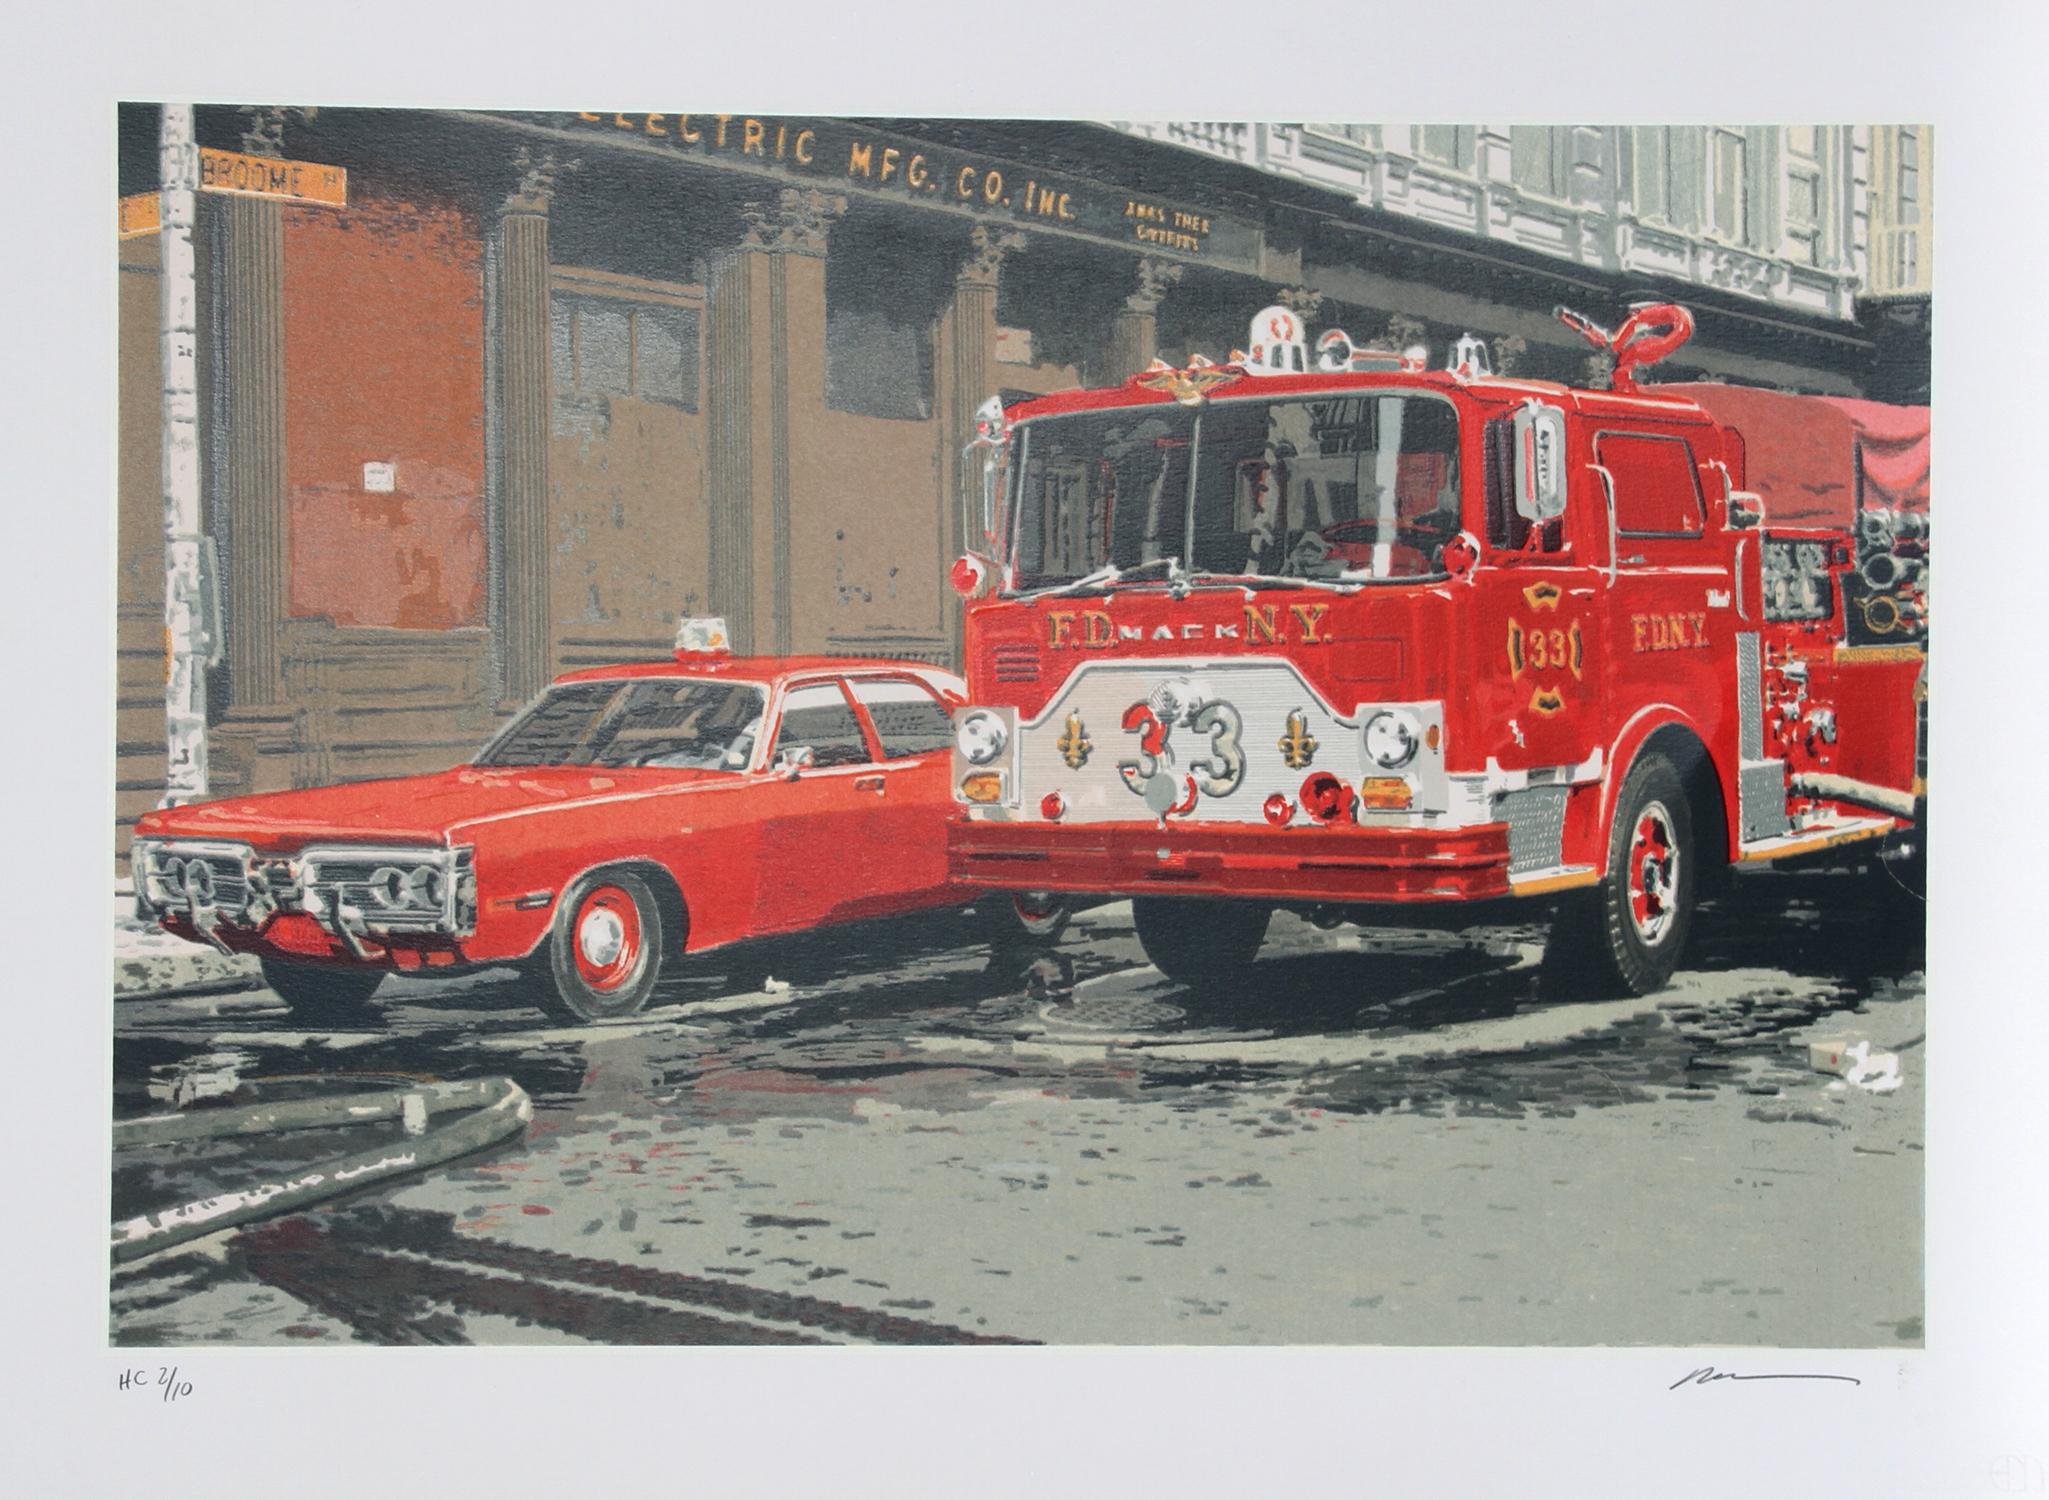 Artist: Ron Kleemann, American (1937 - ) 
Title:  Fire Engine (FDNY)
Year: 1979
Medium: Serigraph on Somerset Paper, signed and numbered in pencil 
Edition: 250
Paper Size: 22 x 30 inches (56 x 76 cm)